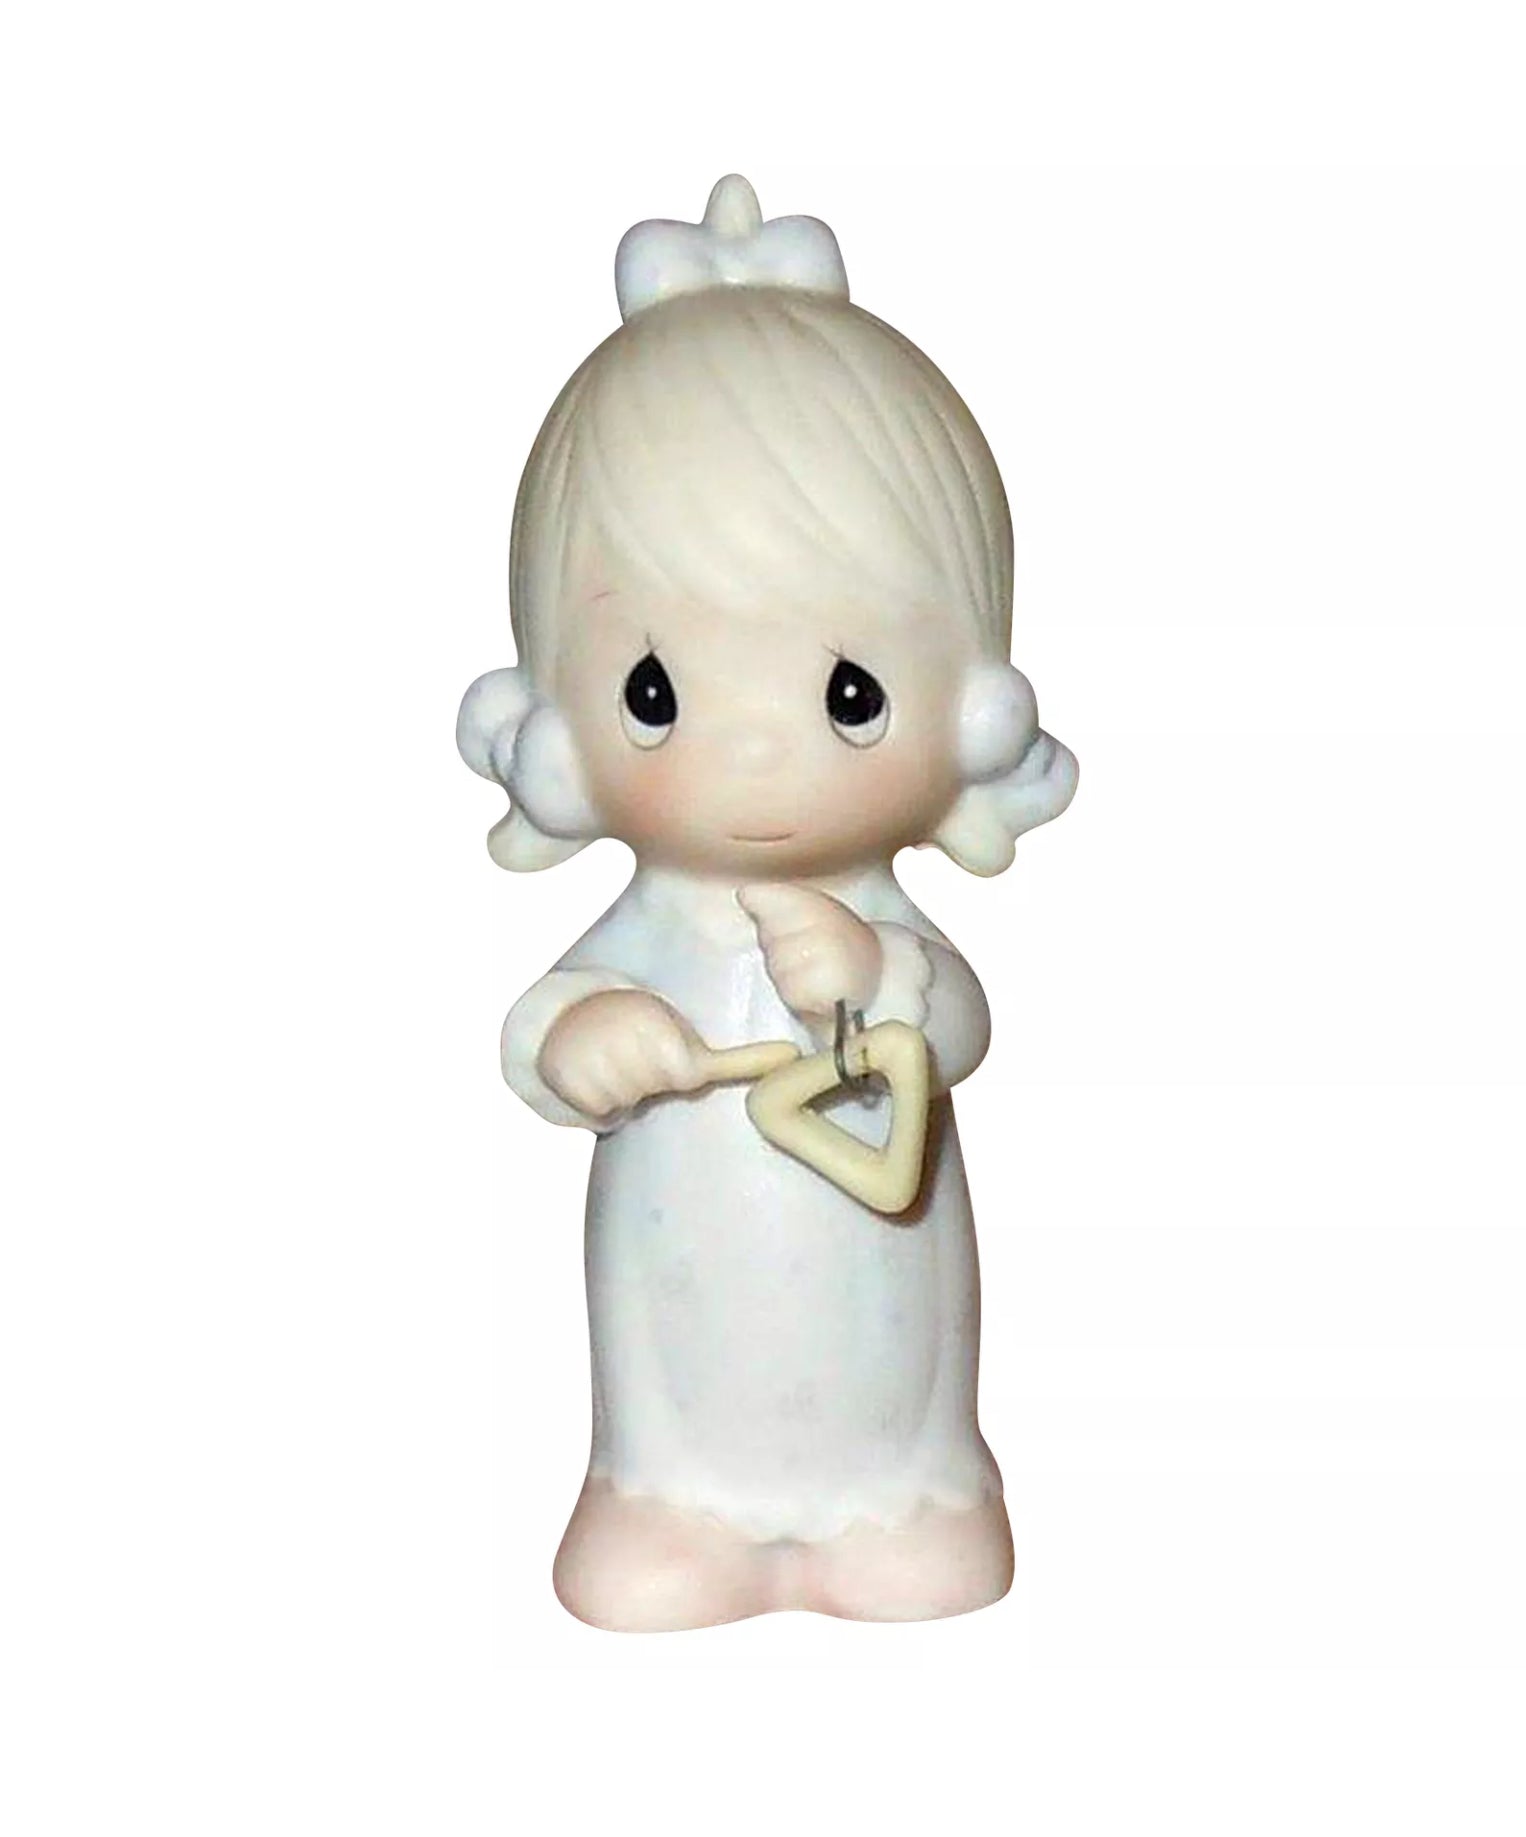 There's A Song In My Heart - Precious Moment Figurine